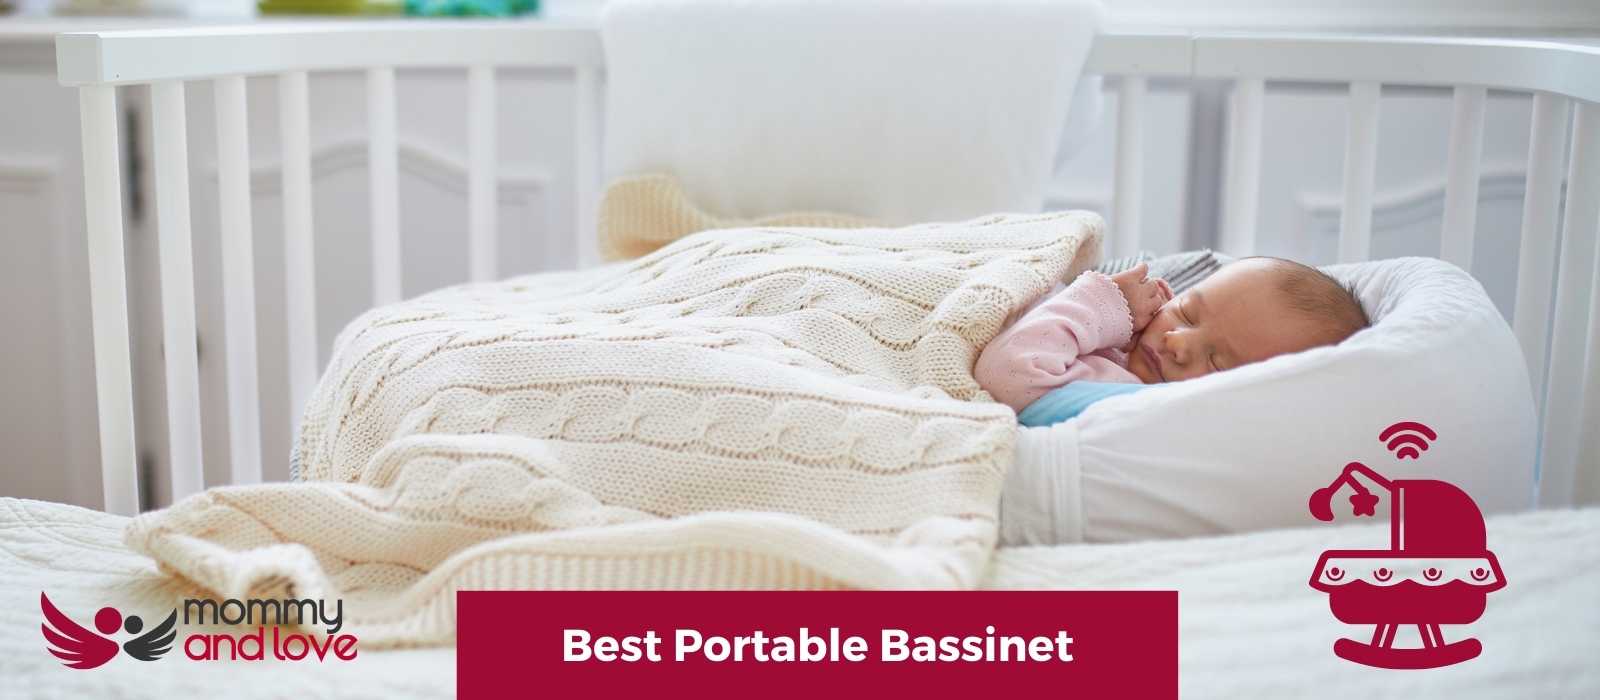 Best Portable Bassinet: What to Look For and How to Choose